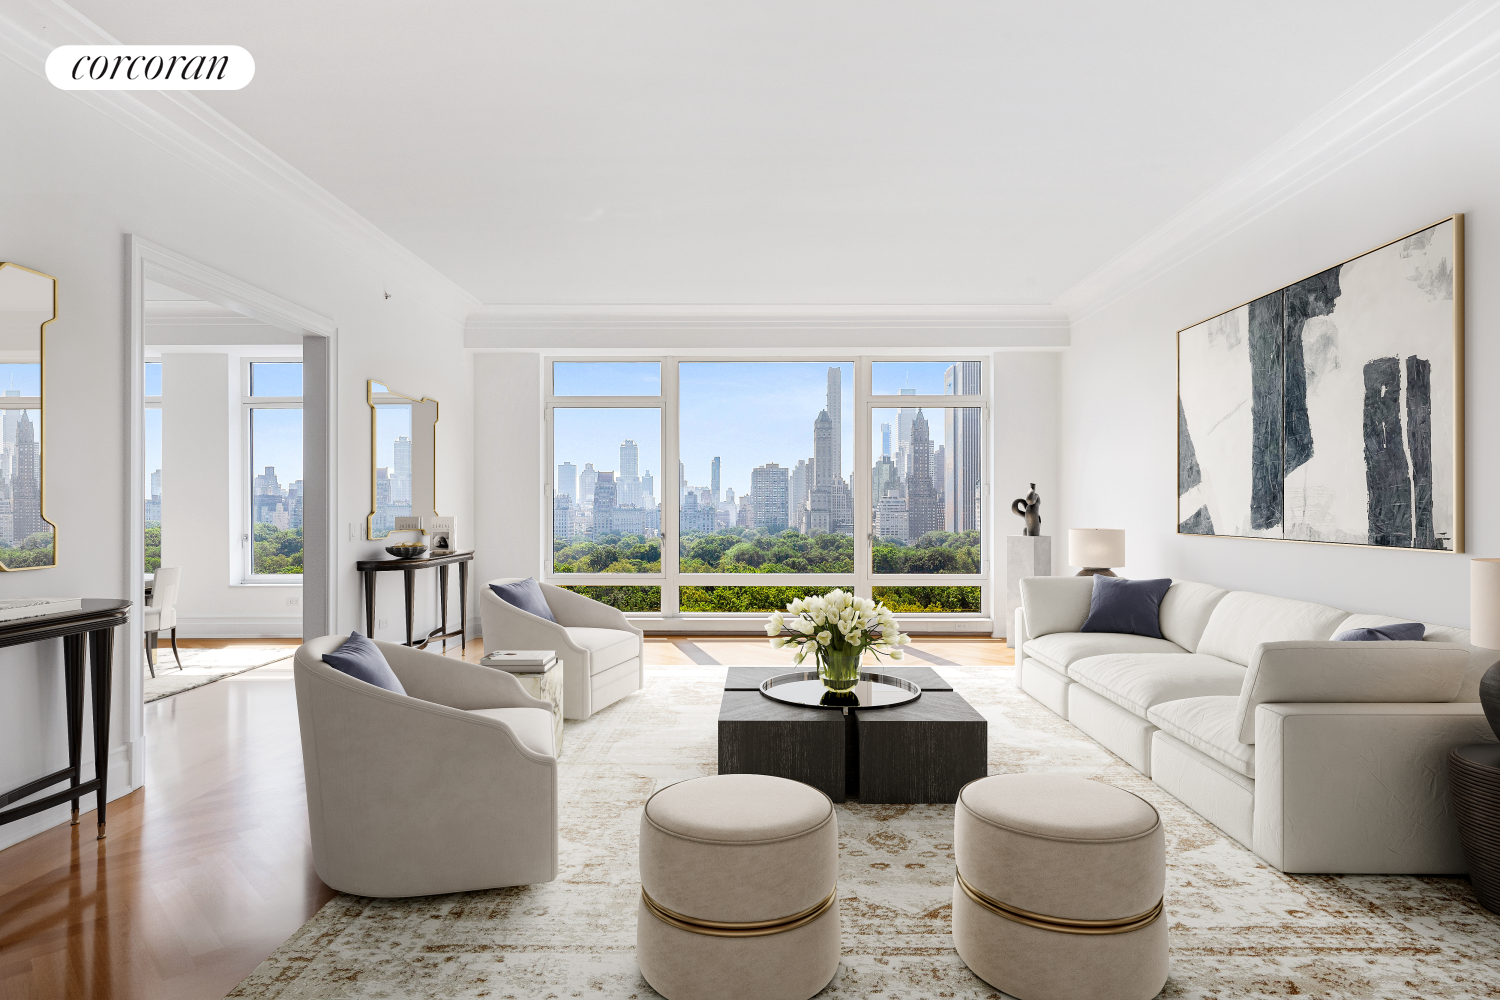 15 Central Park 14B, Lincoln Square, Upper West Side, NYC - 4 Bedrooms  
3.5 Bathrooms  
8 Rooms - 